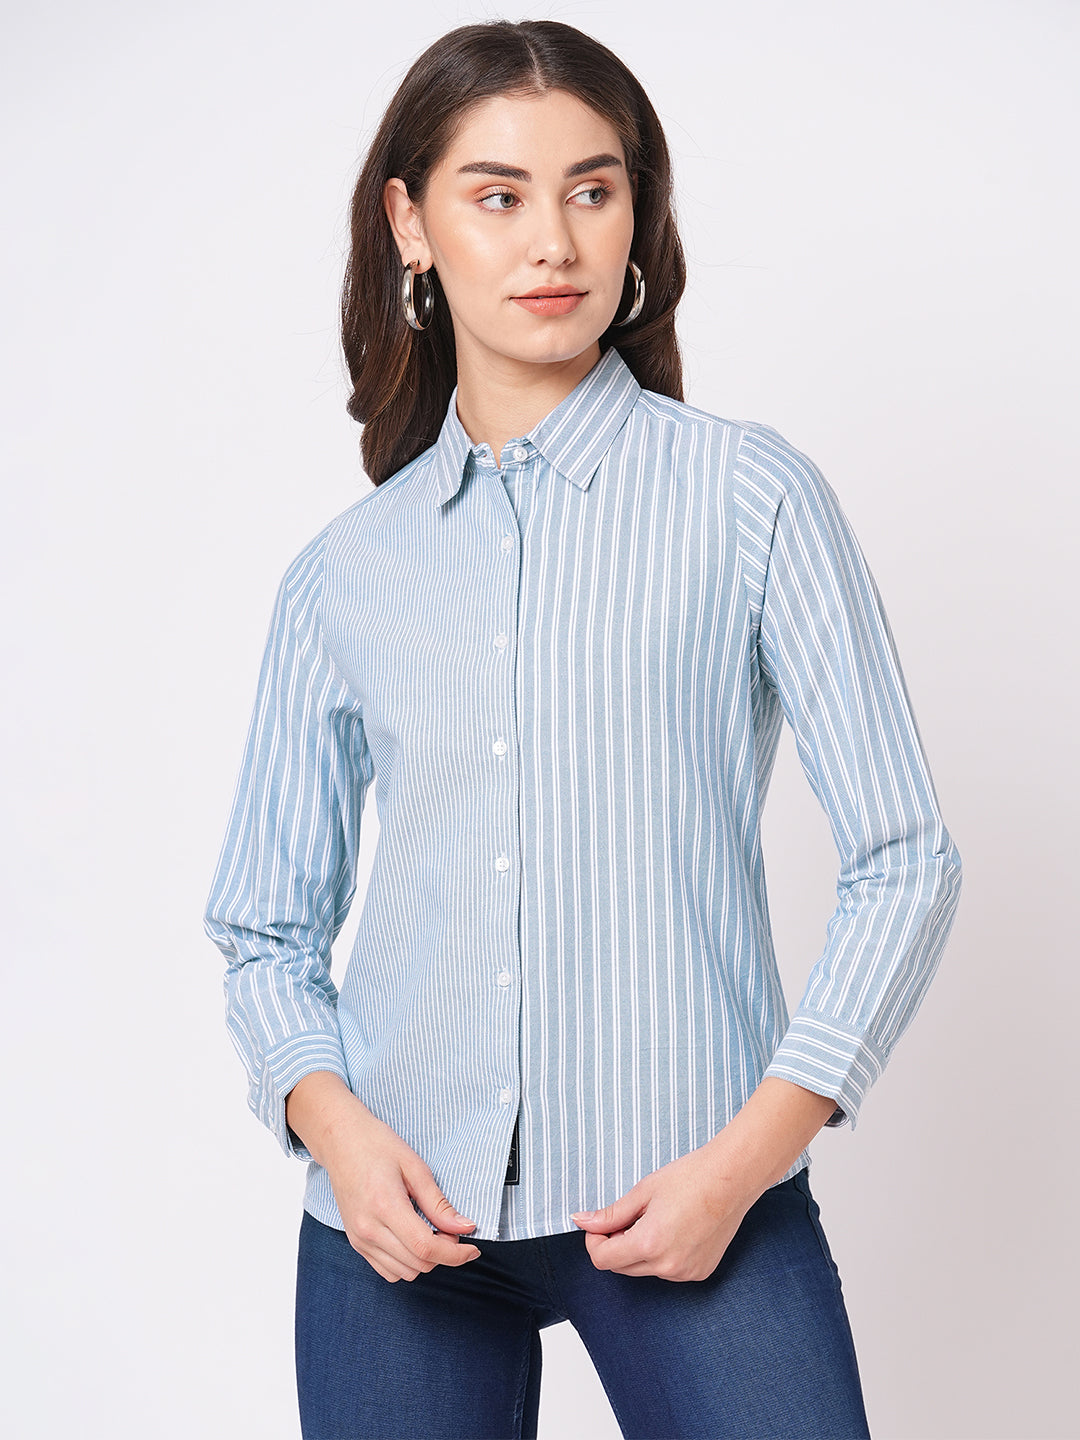 Bombay High Women's Premium Cotton Striped Relaxed Fit Shirt